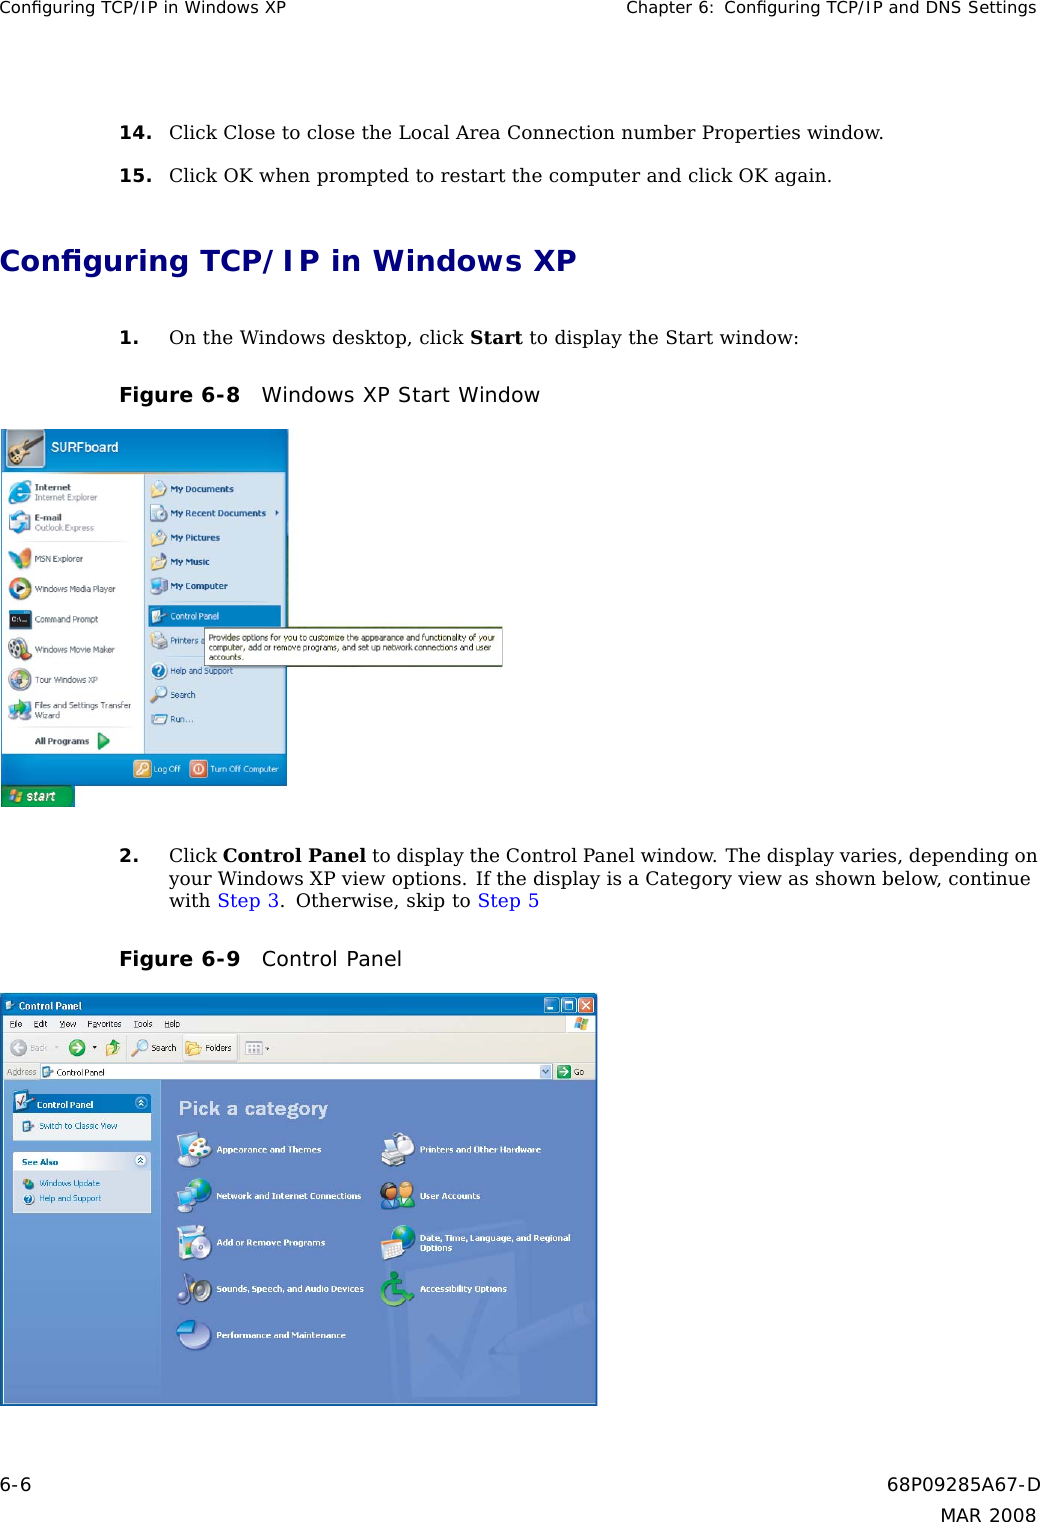 Conﬁguring TCP/IP in Windows XP Chapter 6: Conﬁguring TCP/IP and DNS Settings14. Click Close to close the Local Area Connection number Properties window.15. Click OK when prompted to restart the computer and click OK again.Conﬁguring TCP/IP in Windows XP1. On the Windows desktop, click Start to display the Start window:Figure 6-8 Windows XP Start Window2. Click Control Panel to display the Control Panel window. The display varies, depending onyour Windows XP view options. If the display is a Category view as shown below, continuewith Step 3.Otherwise,skiptoStep 5Figure 6-9 Control Panel6-6 68P09285A67-DMAR 2008